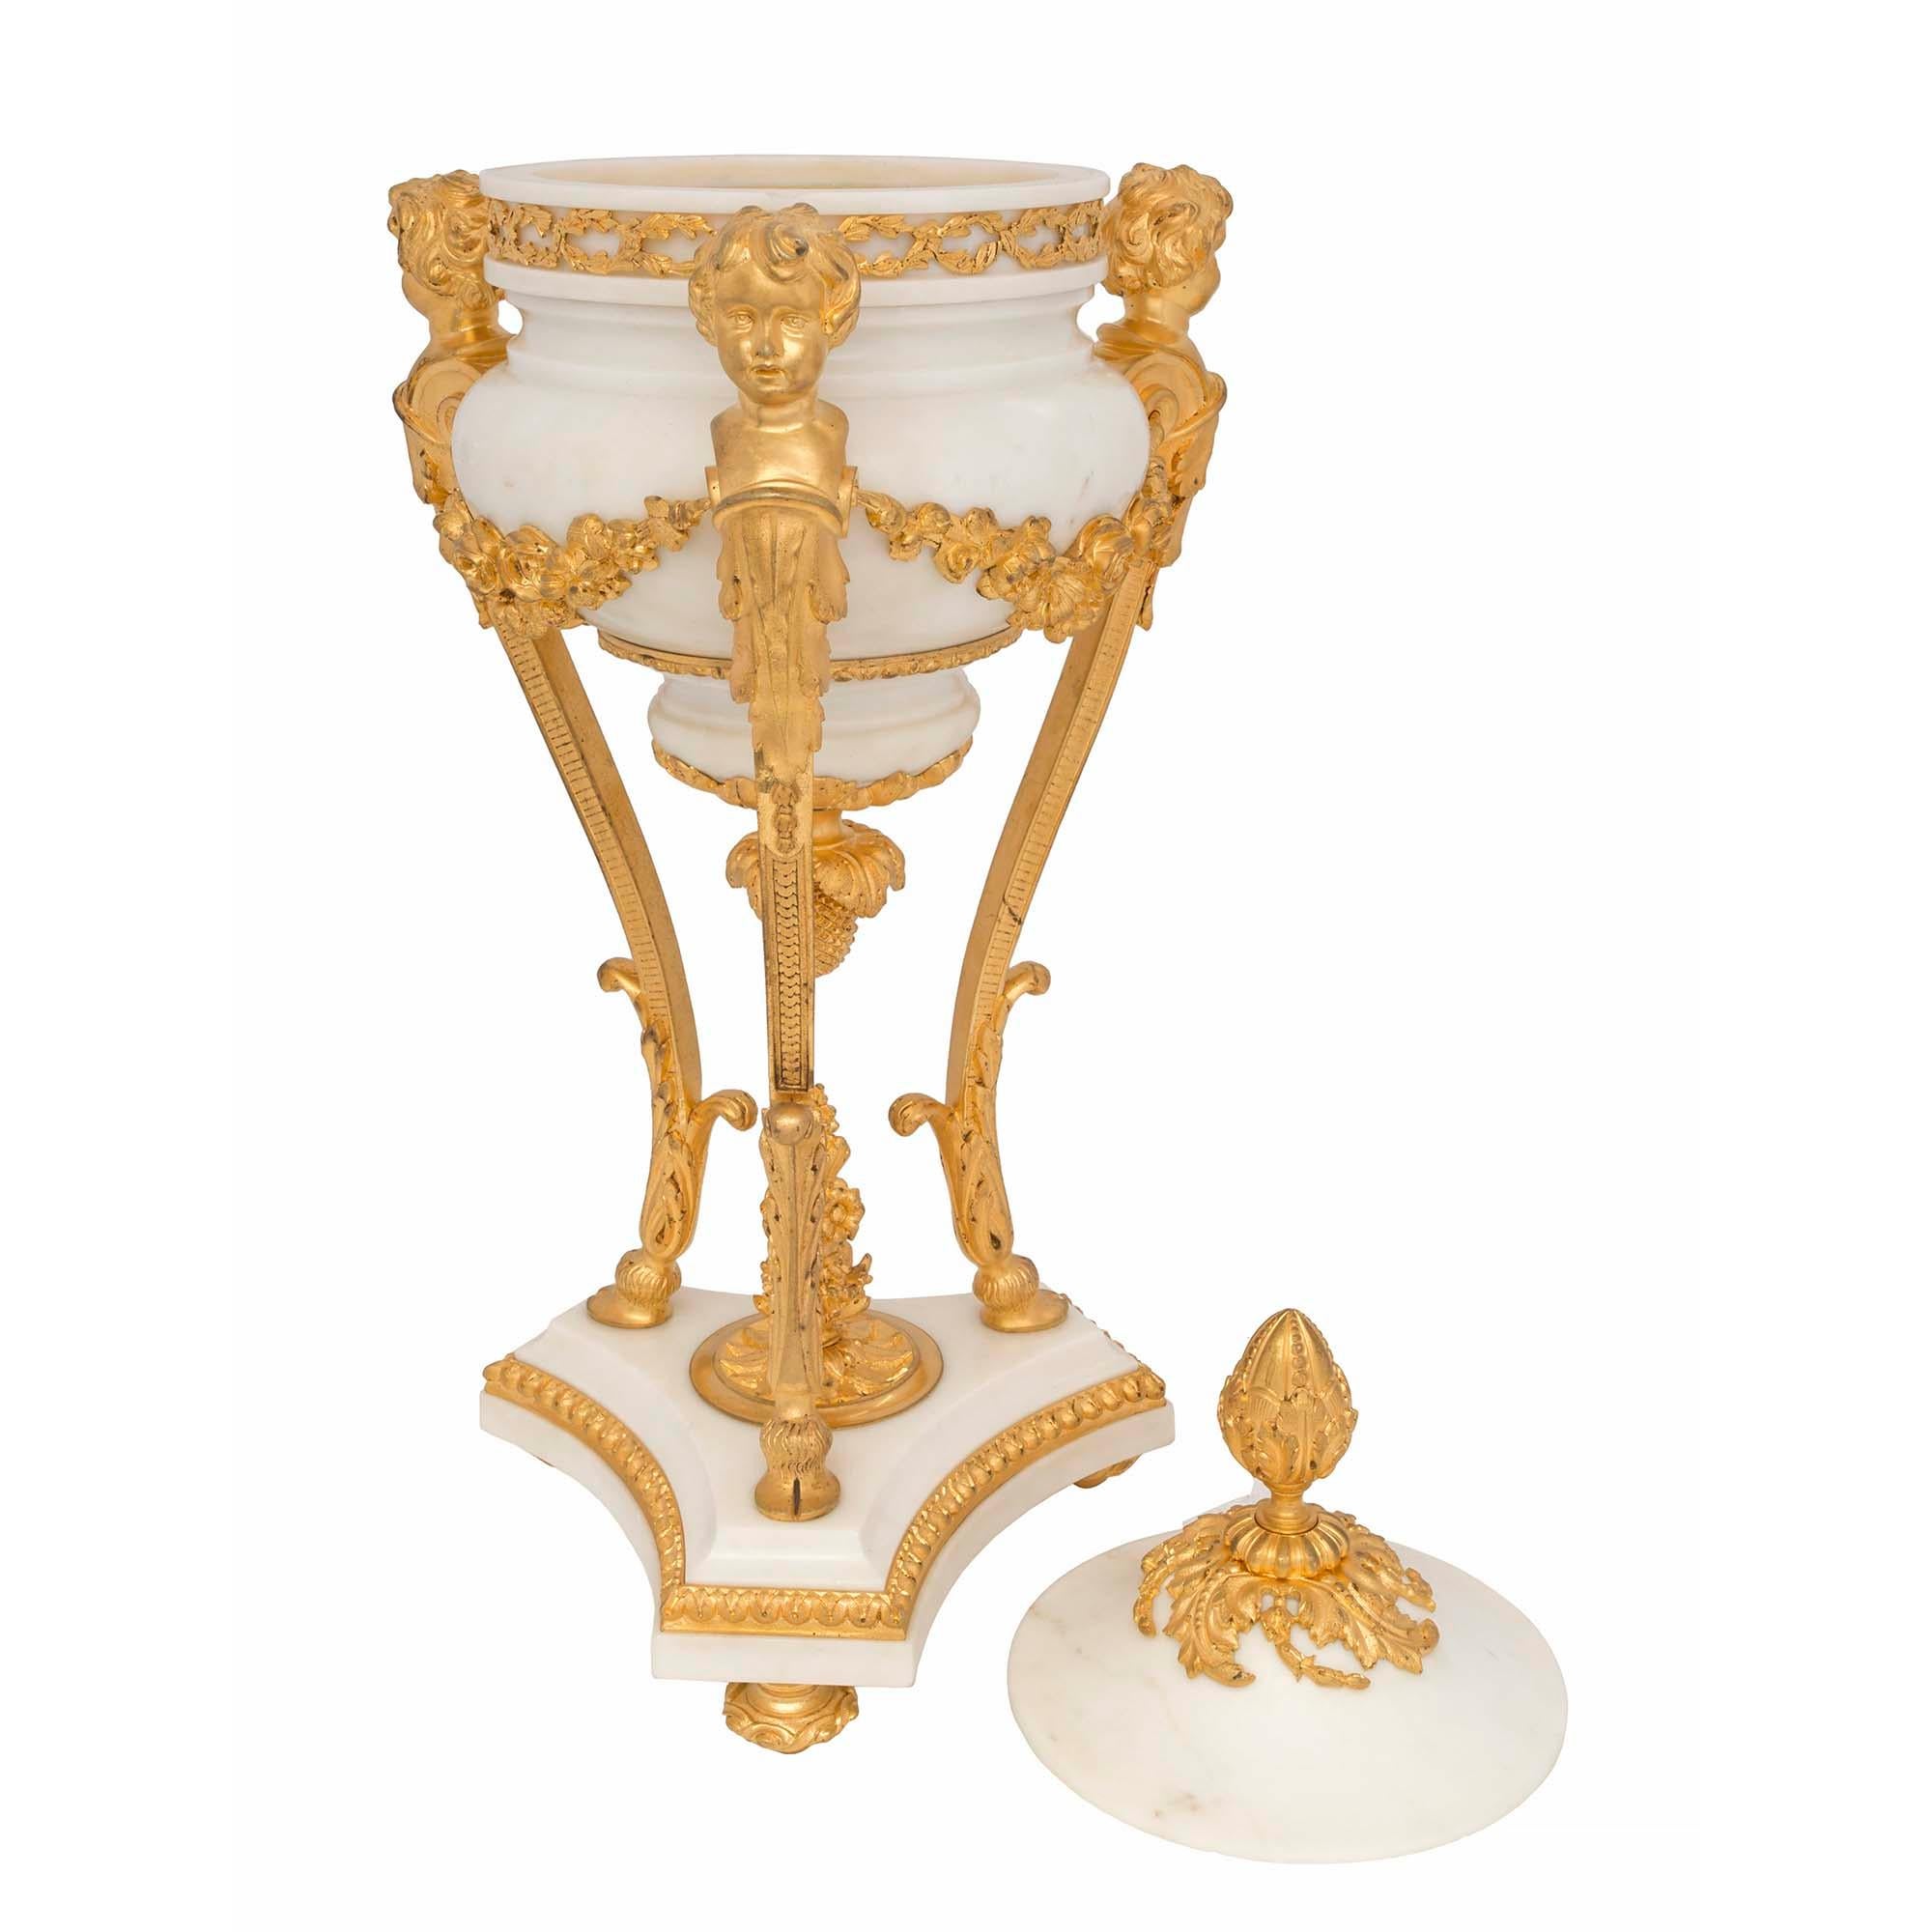 A spectacular and large scale French 19th century Louis XVI st. white carrara and ormolu lidded urn. The urn is raised by a concave triangular shaped base decorated by an ormolu trim all above ormolu topie shaped feet. The base has a central foliate